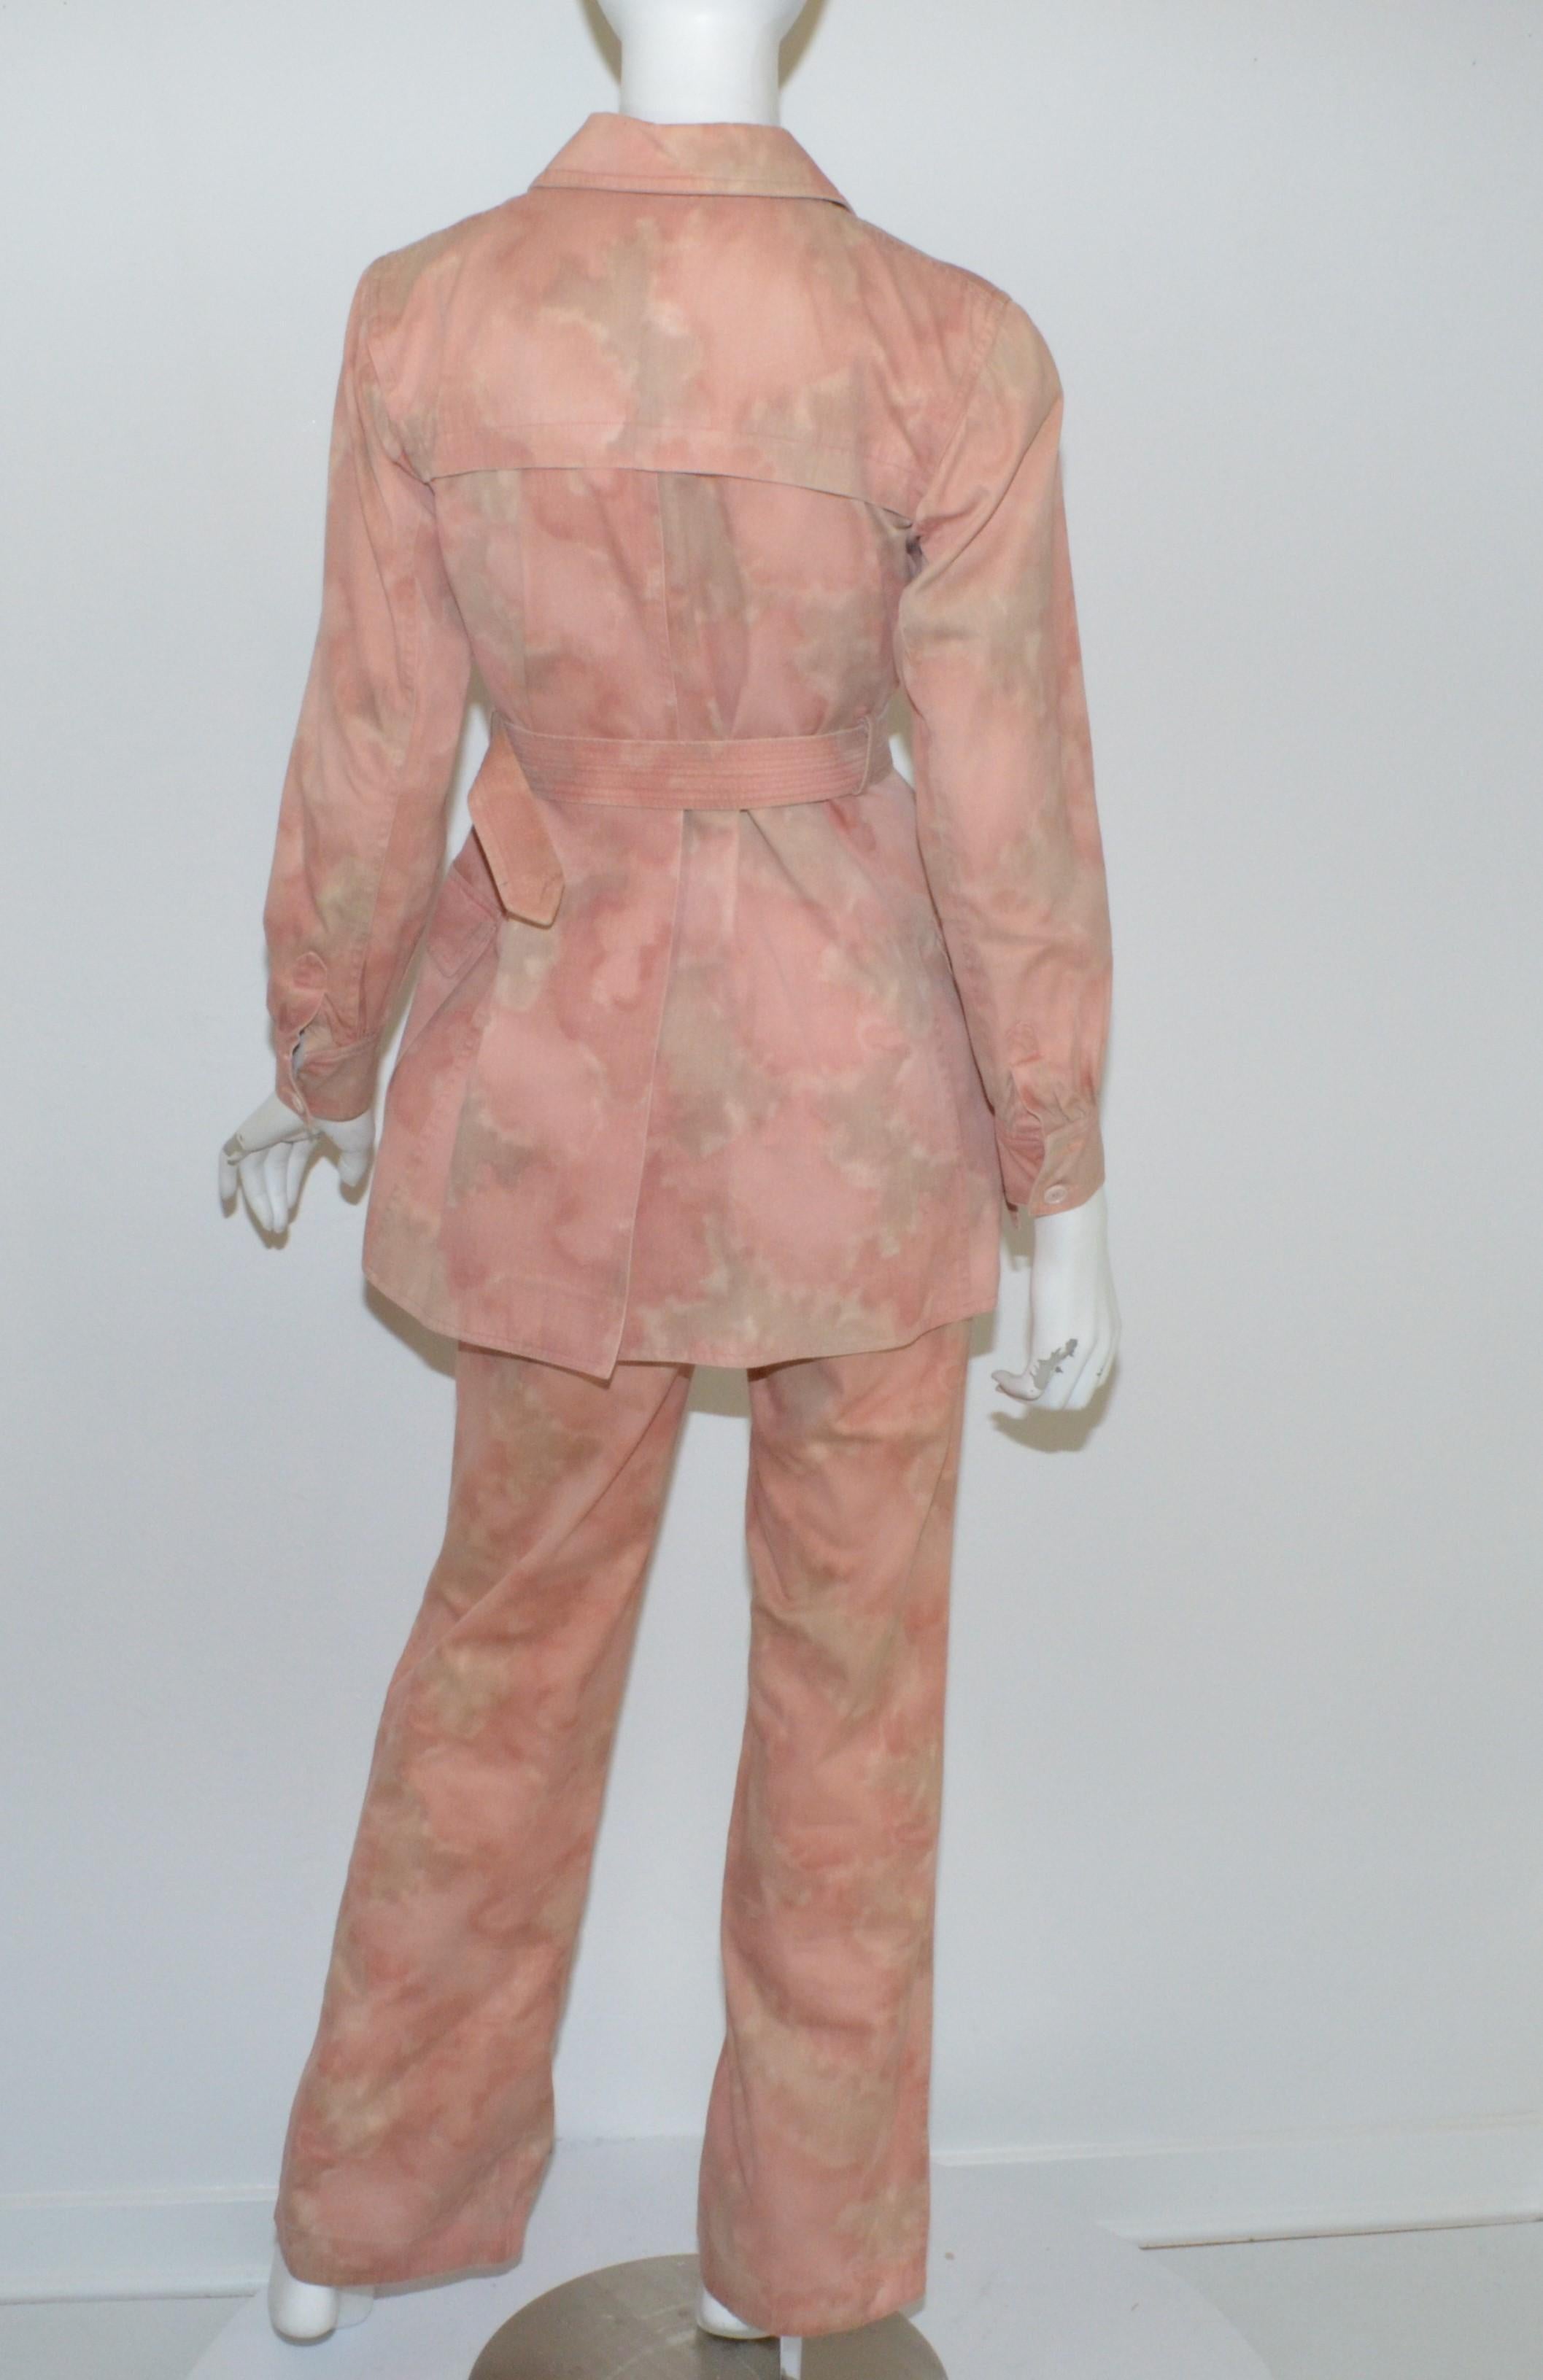 Yves Saint Laurent Rive Gauche vintage pant set featured in a powder pink and beige with a tye-dye pattern throughout. This fabulous ensemble came from a Parisian model in which was gifted several Saint Laurent pieces. Iconic Safari Jacket has